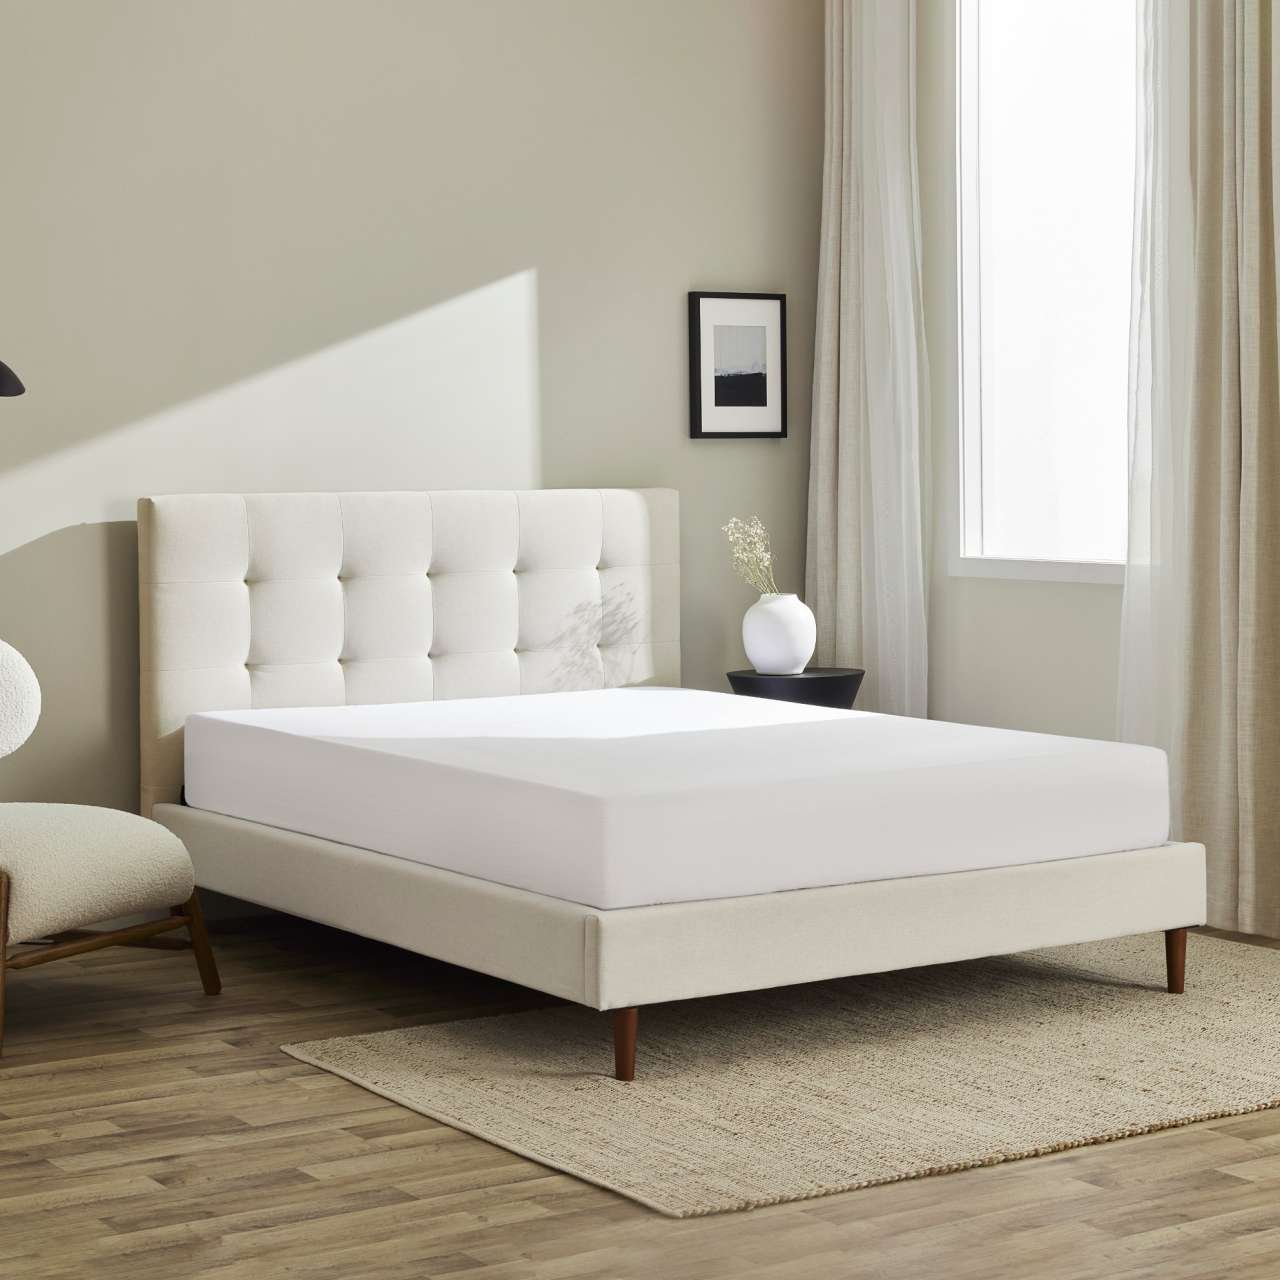 Haven Cushioned Wool Bed Frame & Headboard